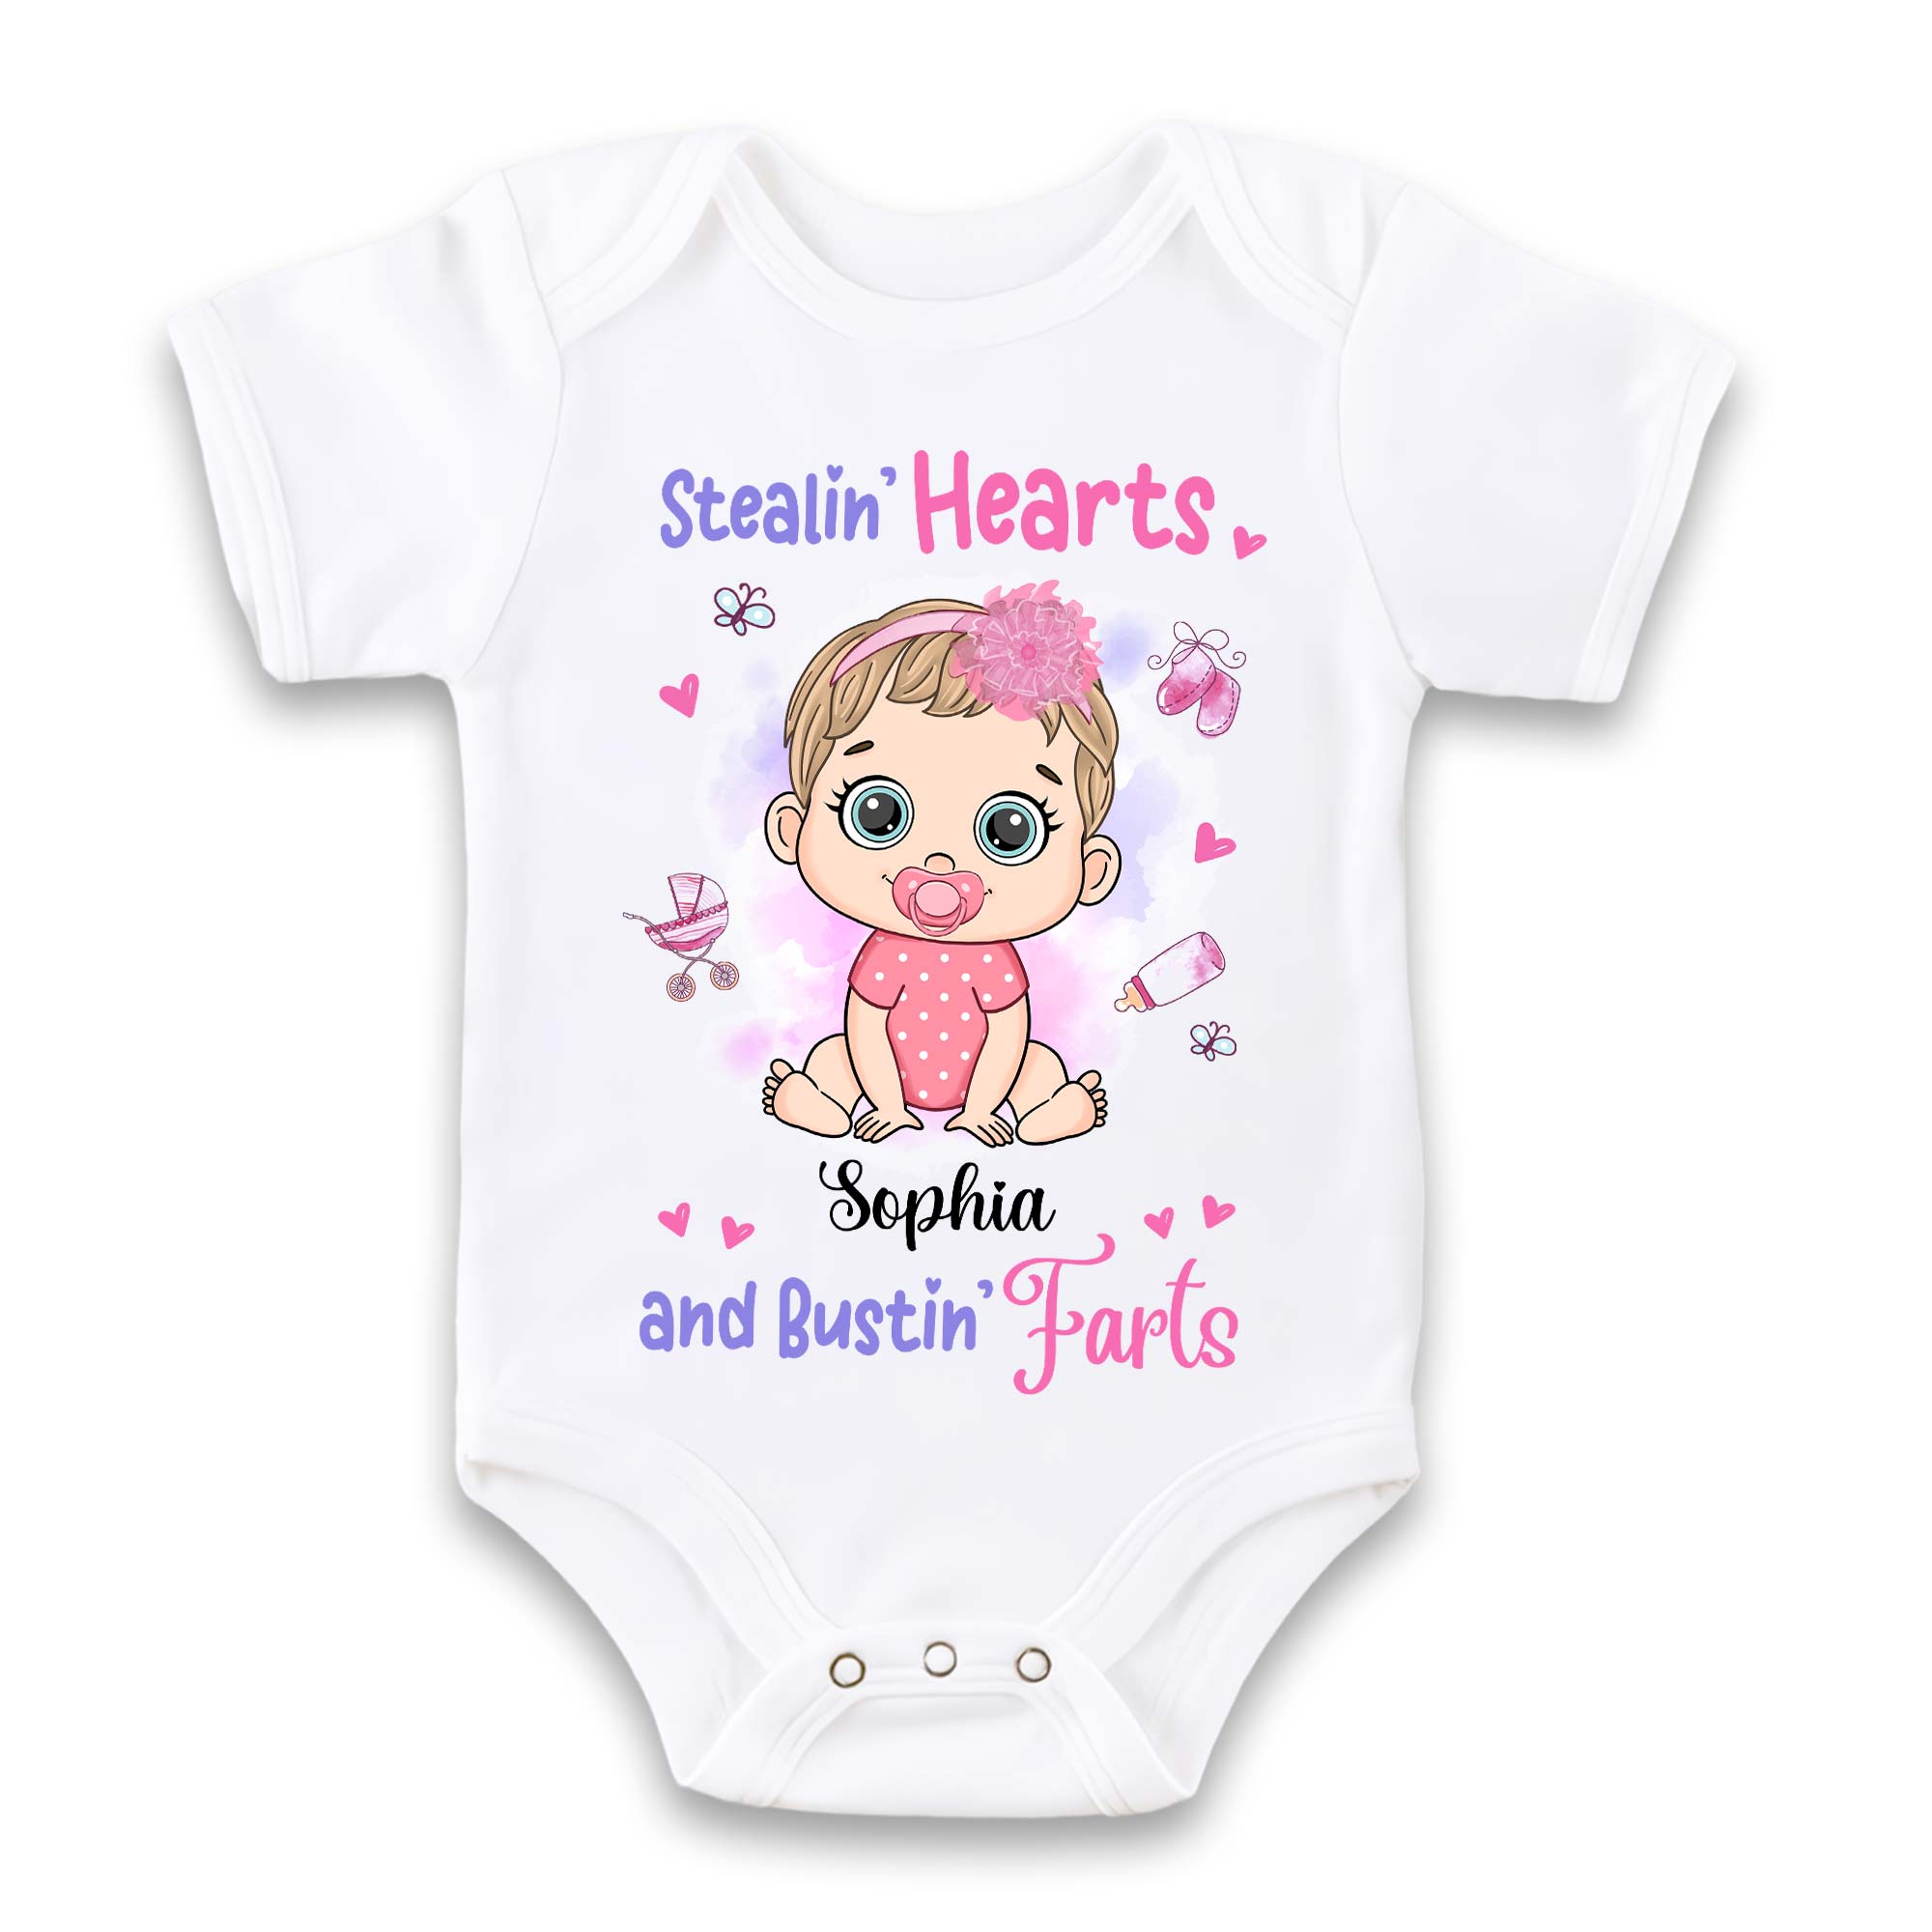 Personalized Gift For Baby First Stealin' Hearts and Bustin' Farts Baby Onesie 31287 Primary Mockup